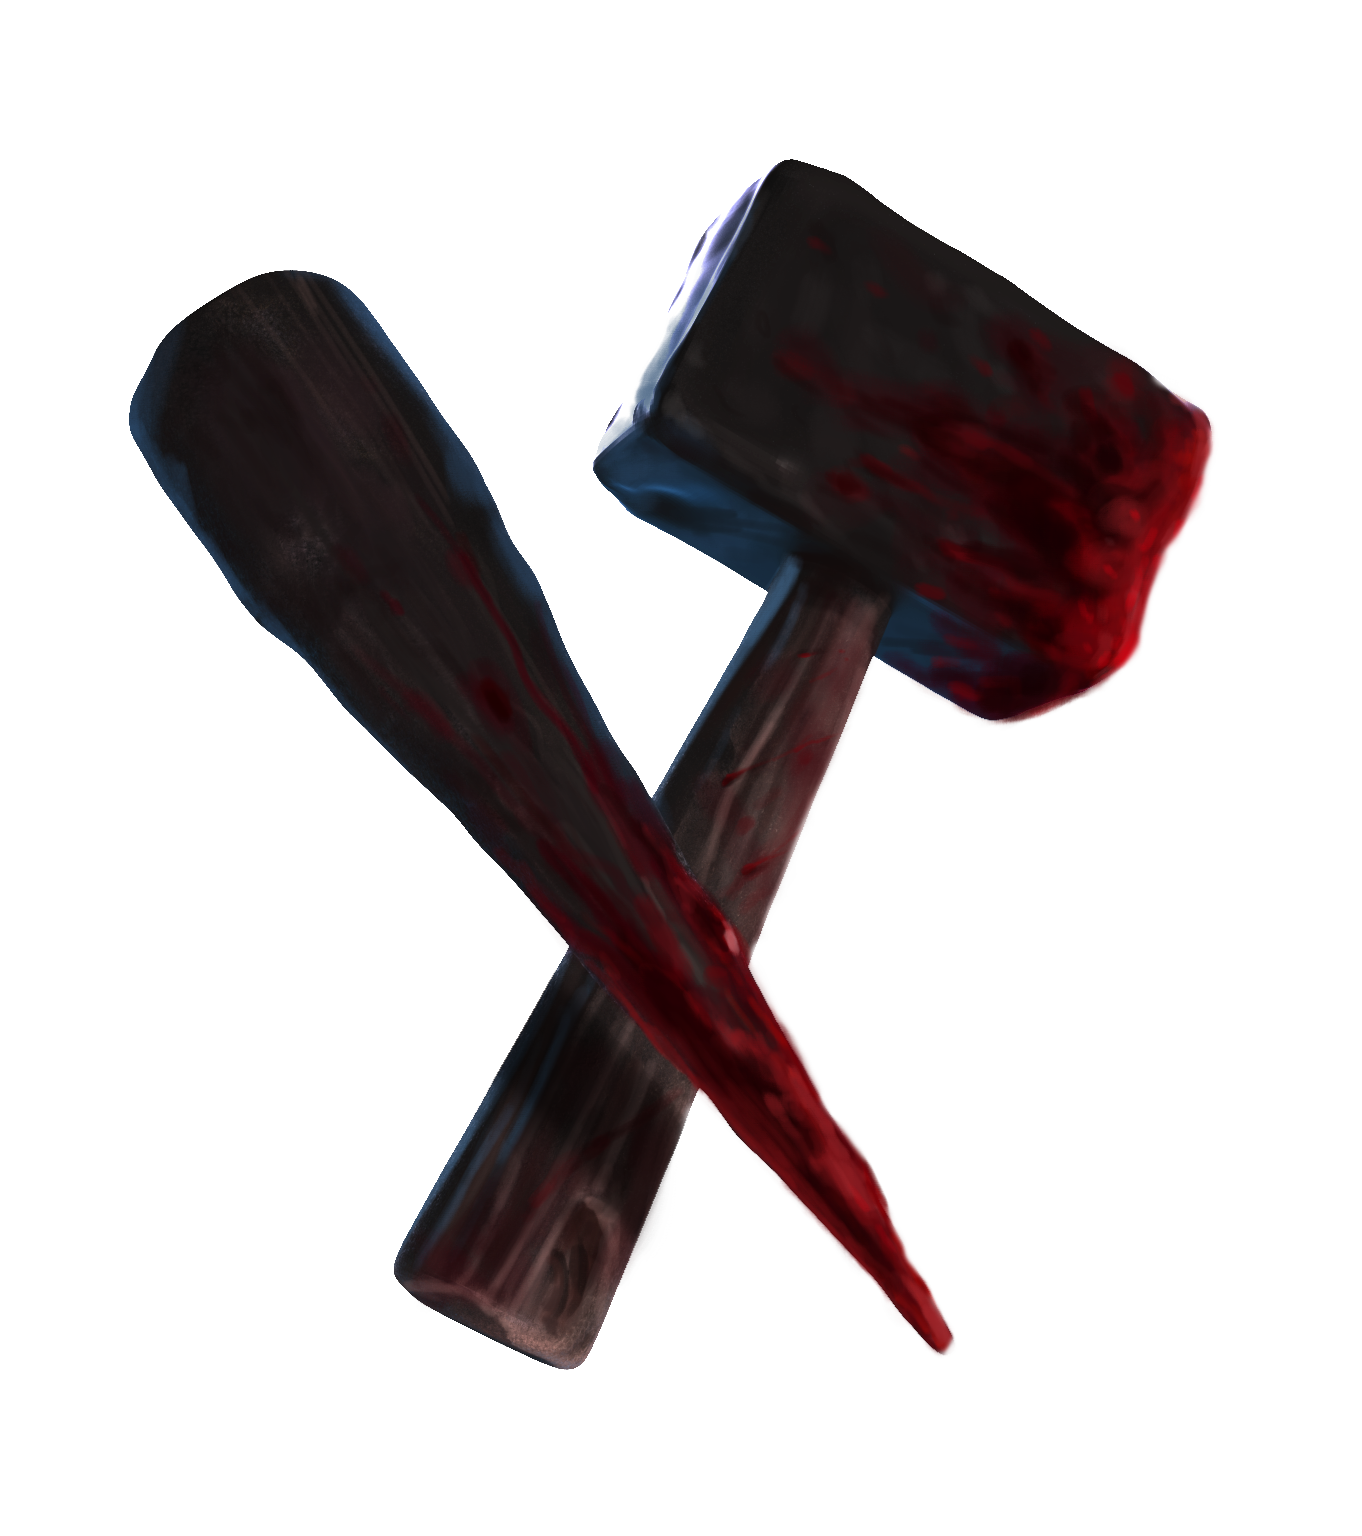 97_extra_stake_hammer_crossed_blood_transparent_halloween.png thumbnail